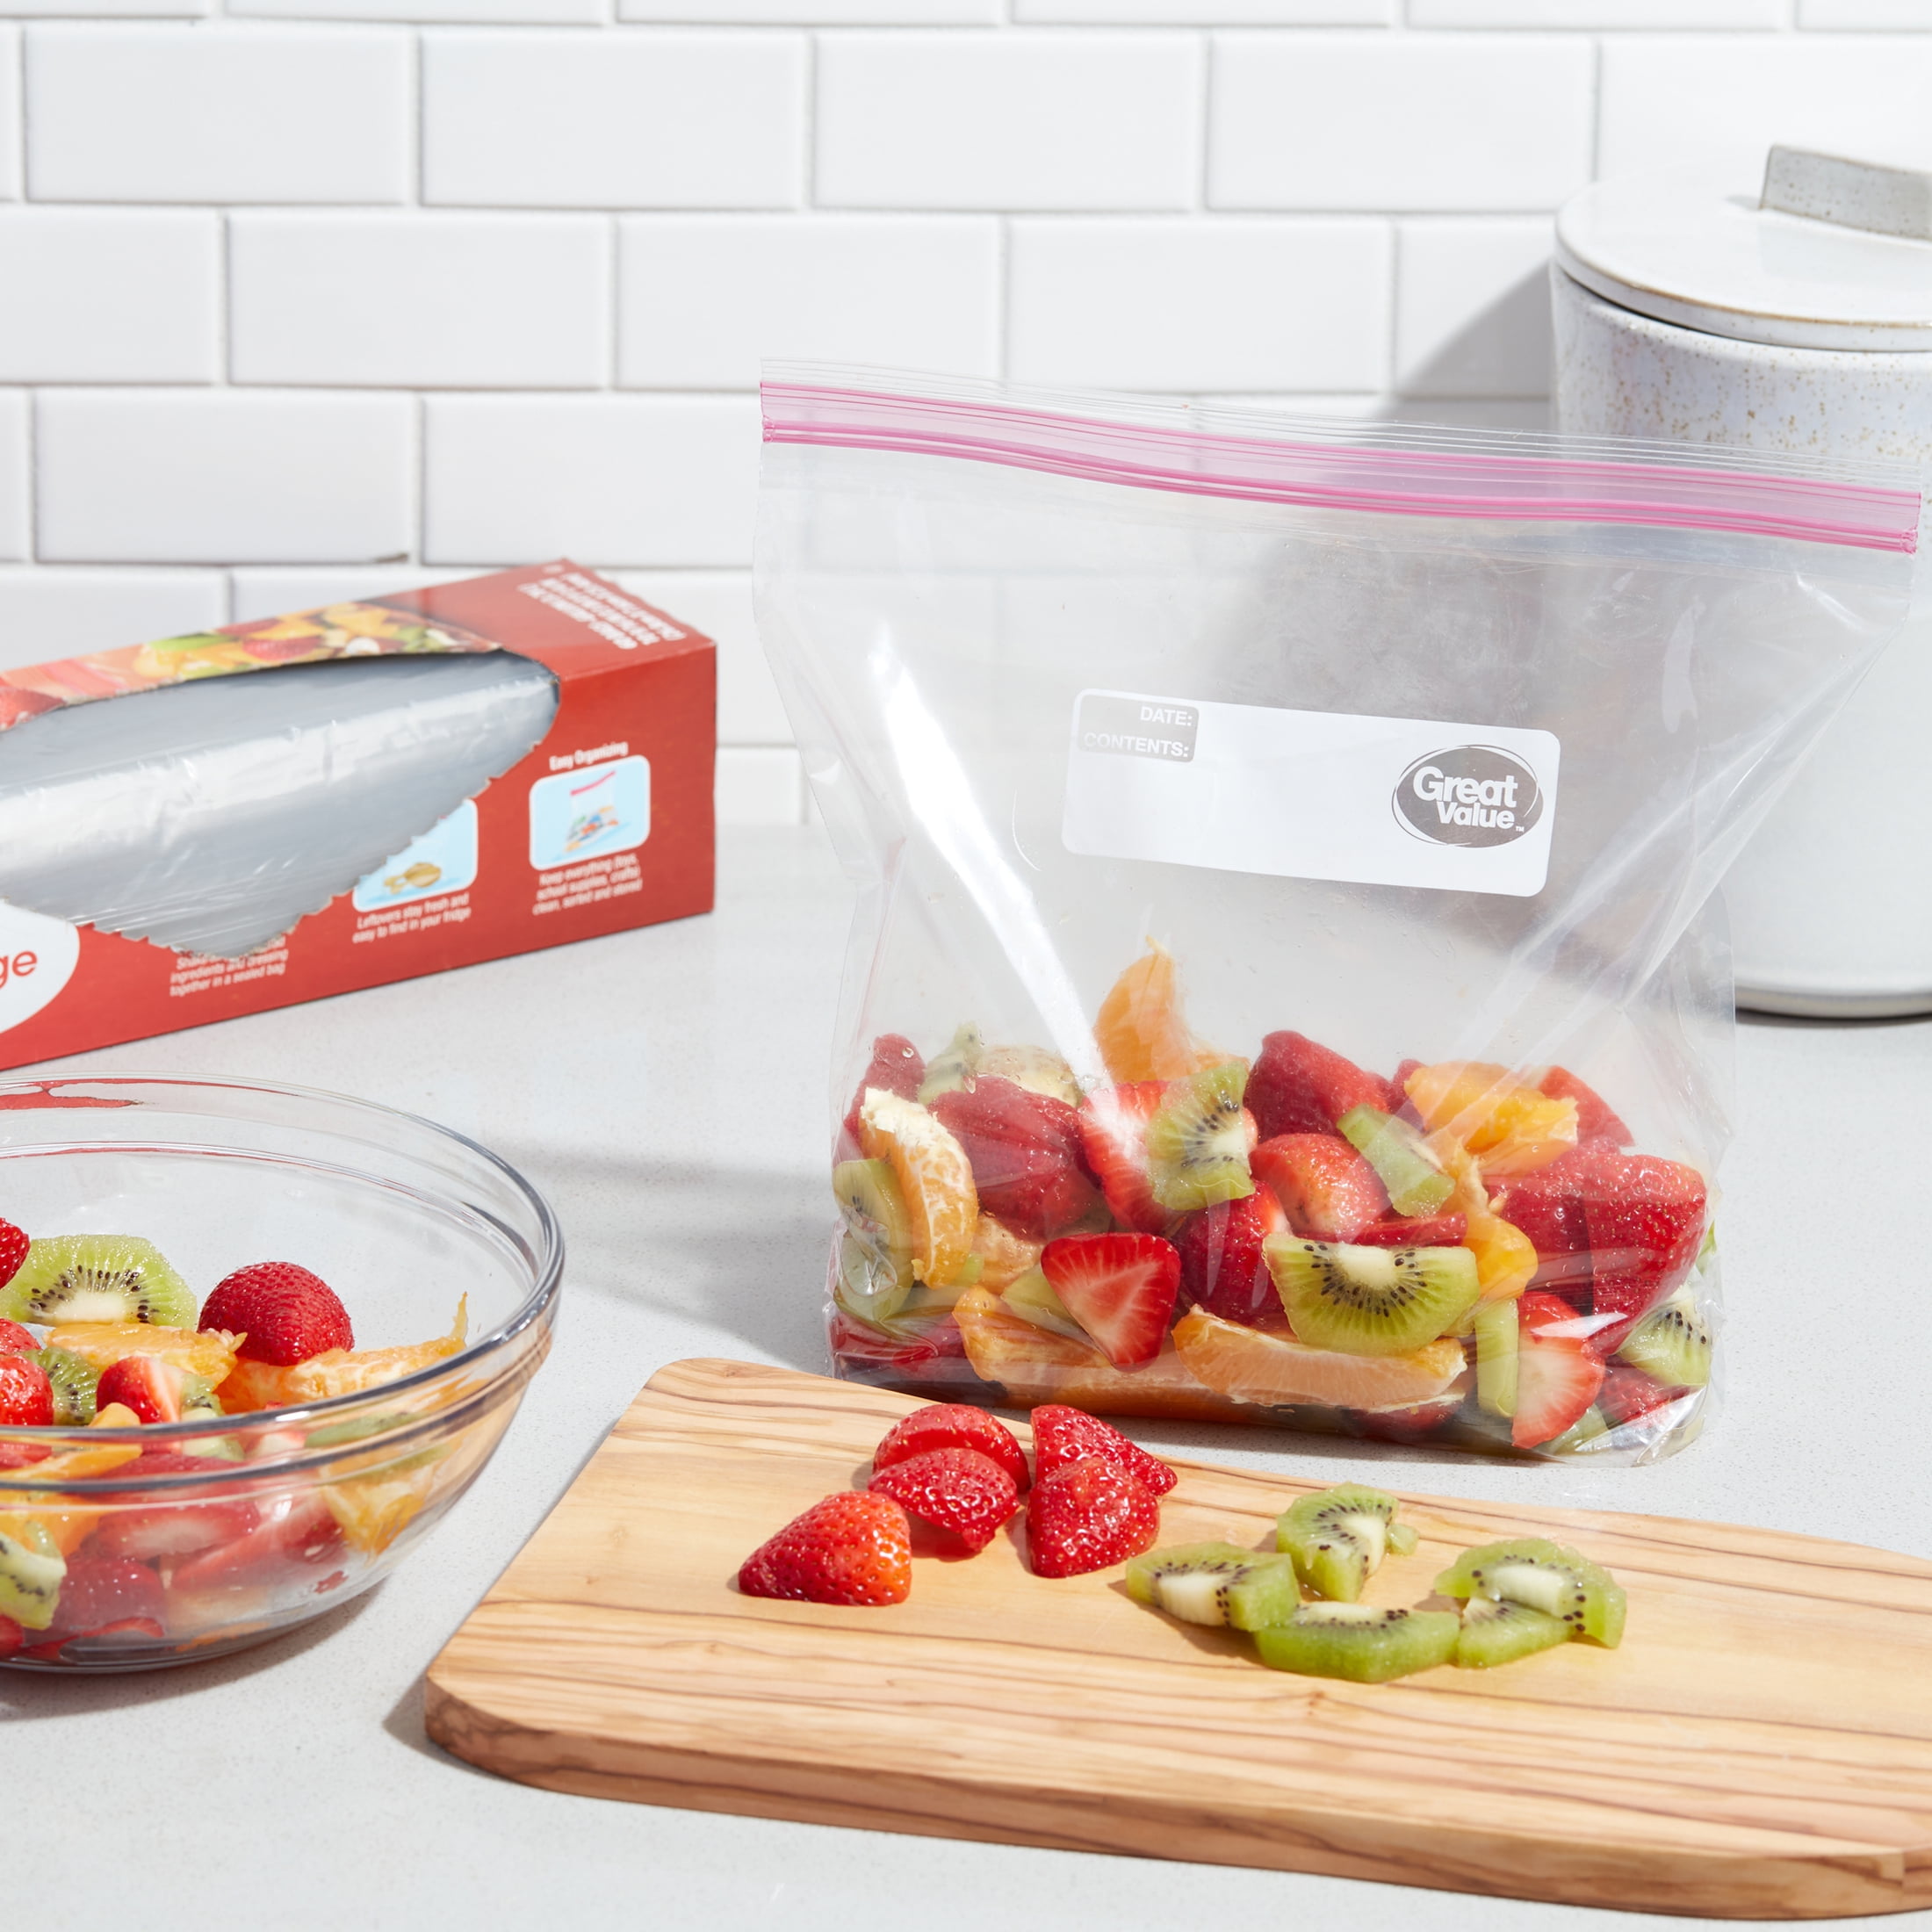 Ziploc® Double Zipper Gallon Storage Bags - Large Size - 3.79 L - 10.56  (268.29 mm) Width x 10.75 (273.05 mm) Depth - 2.70 mil (69 Micron)  Thickness - Clear - Plastic - 250/Carton - Food, Vegetables, Fruit,  Cosmetics, Yarn, Business Card, Map, Meat